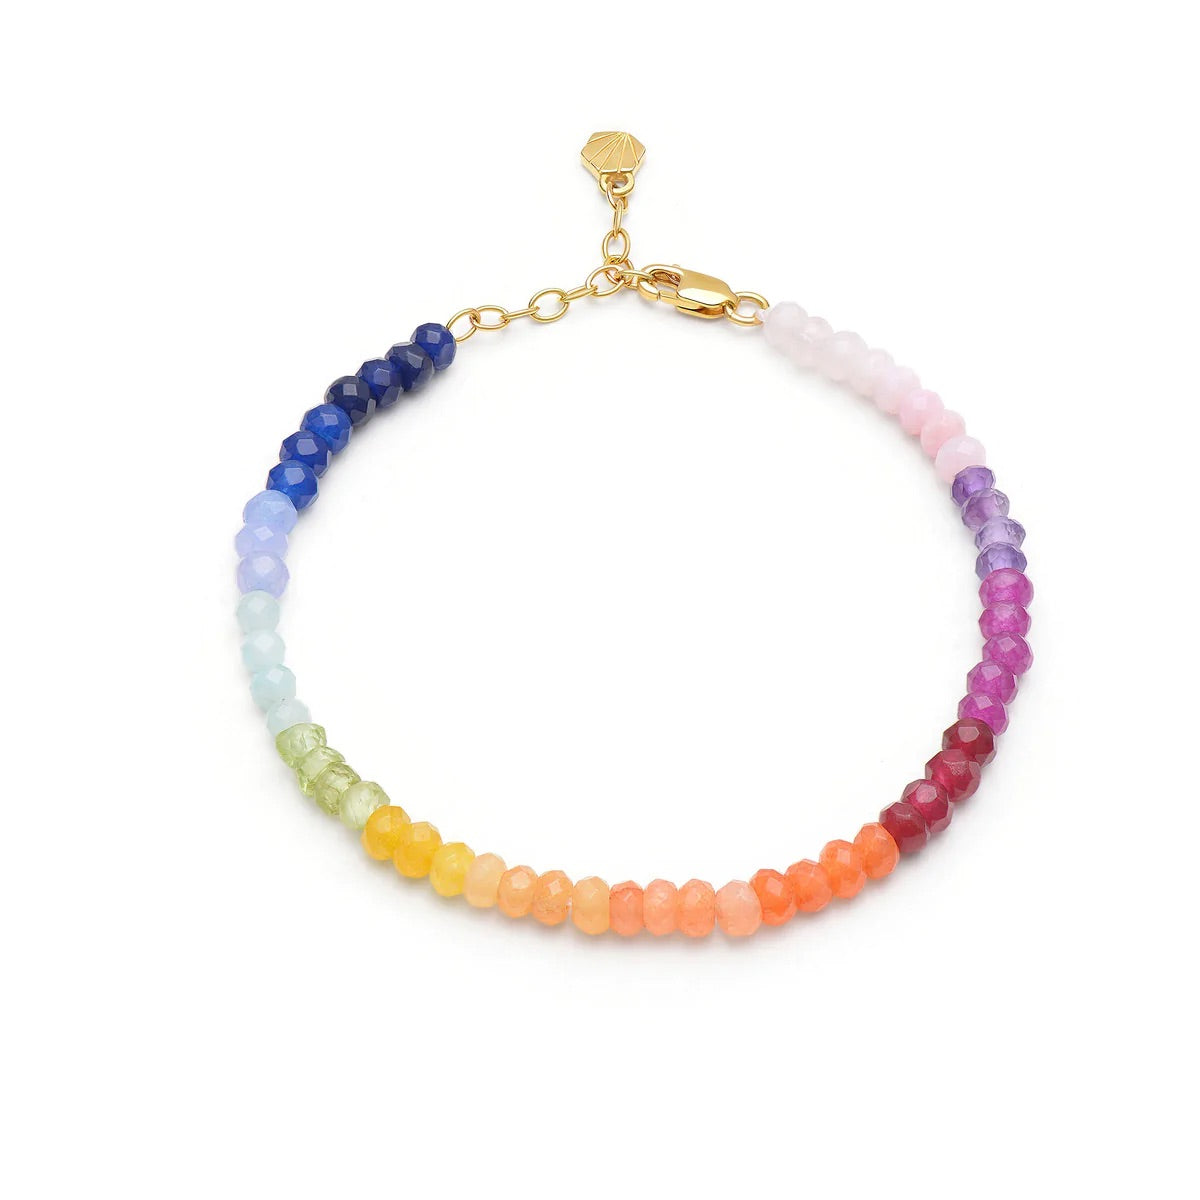 An adjustable length rainbow gemstone anklet with a gold chain and semi-precious stones, called the Rainbow Gemstone Anklet - Sunset by Rachel Jackson London.